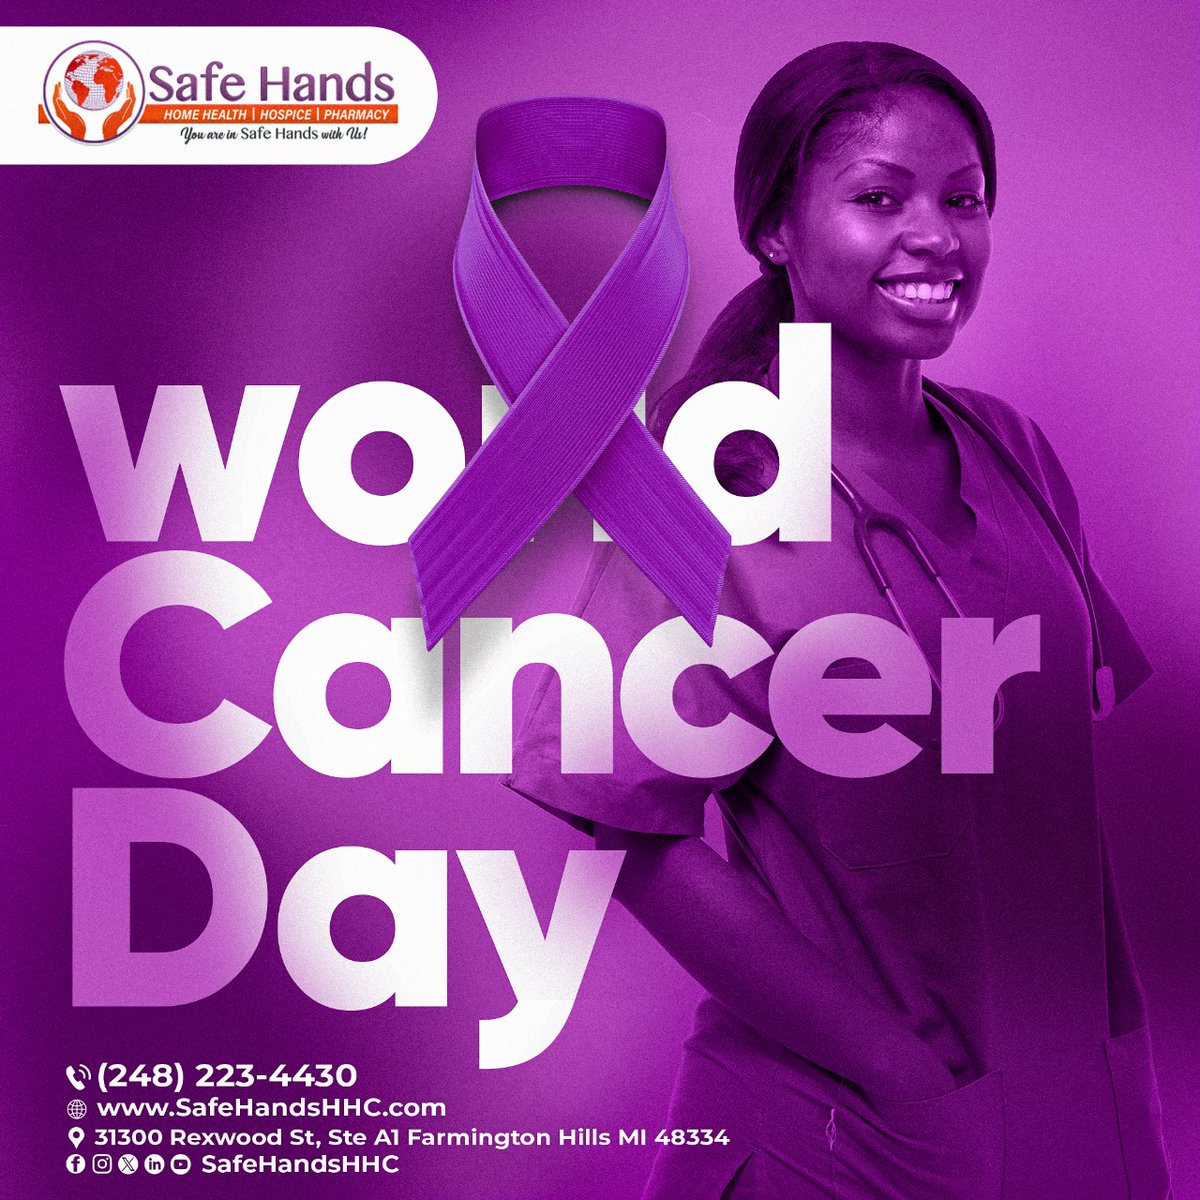 Together, we can make a difference. Join us in raising awareness on World Cancer Day. 💜

#SafeHandsHHC #WorldCancerDay #CancerAwareness #4thFeburary #staystrong #fightwithcancertogether #safetheworld #homehealthcare #Michigan